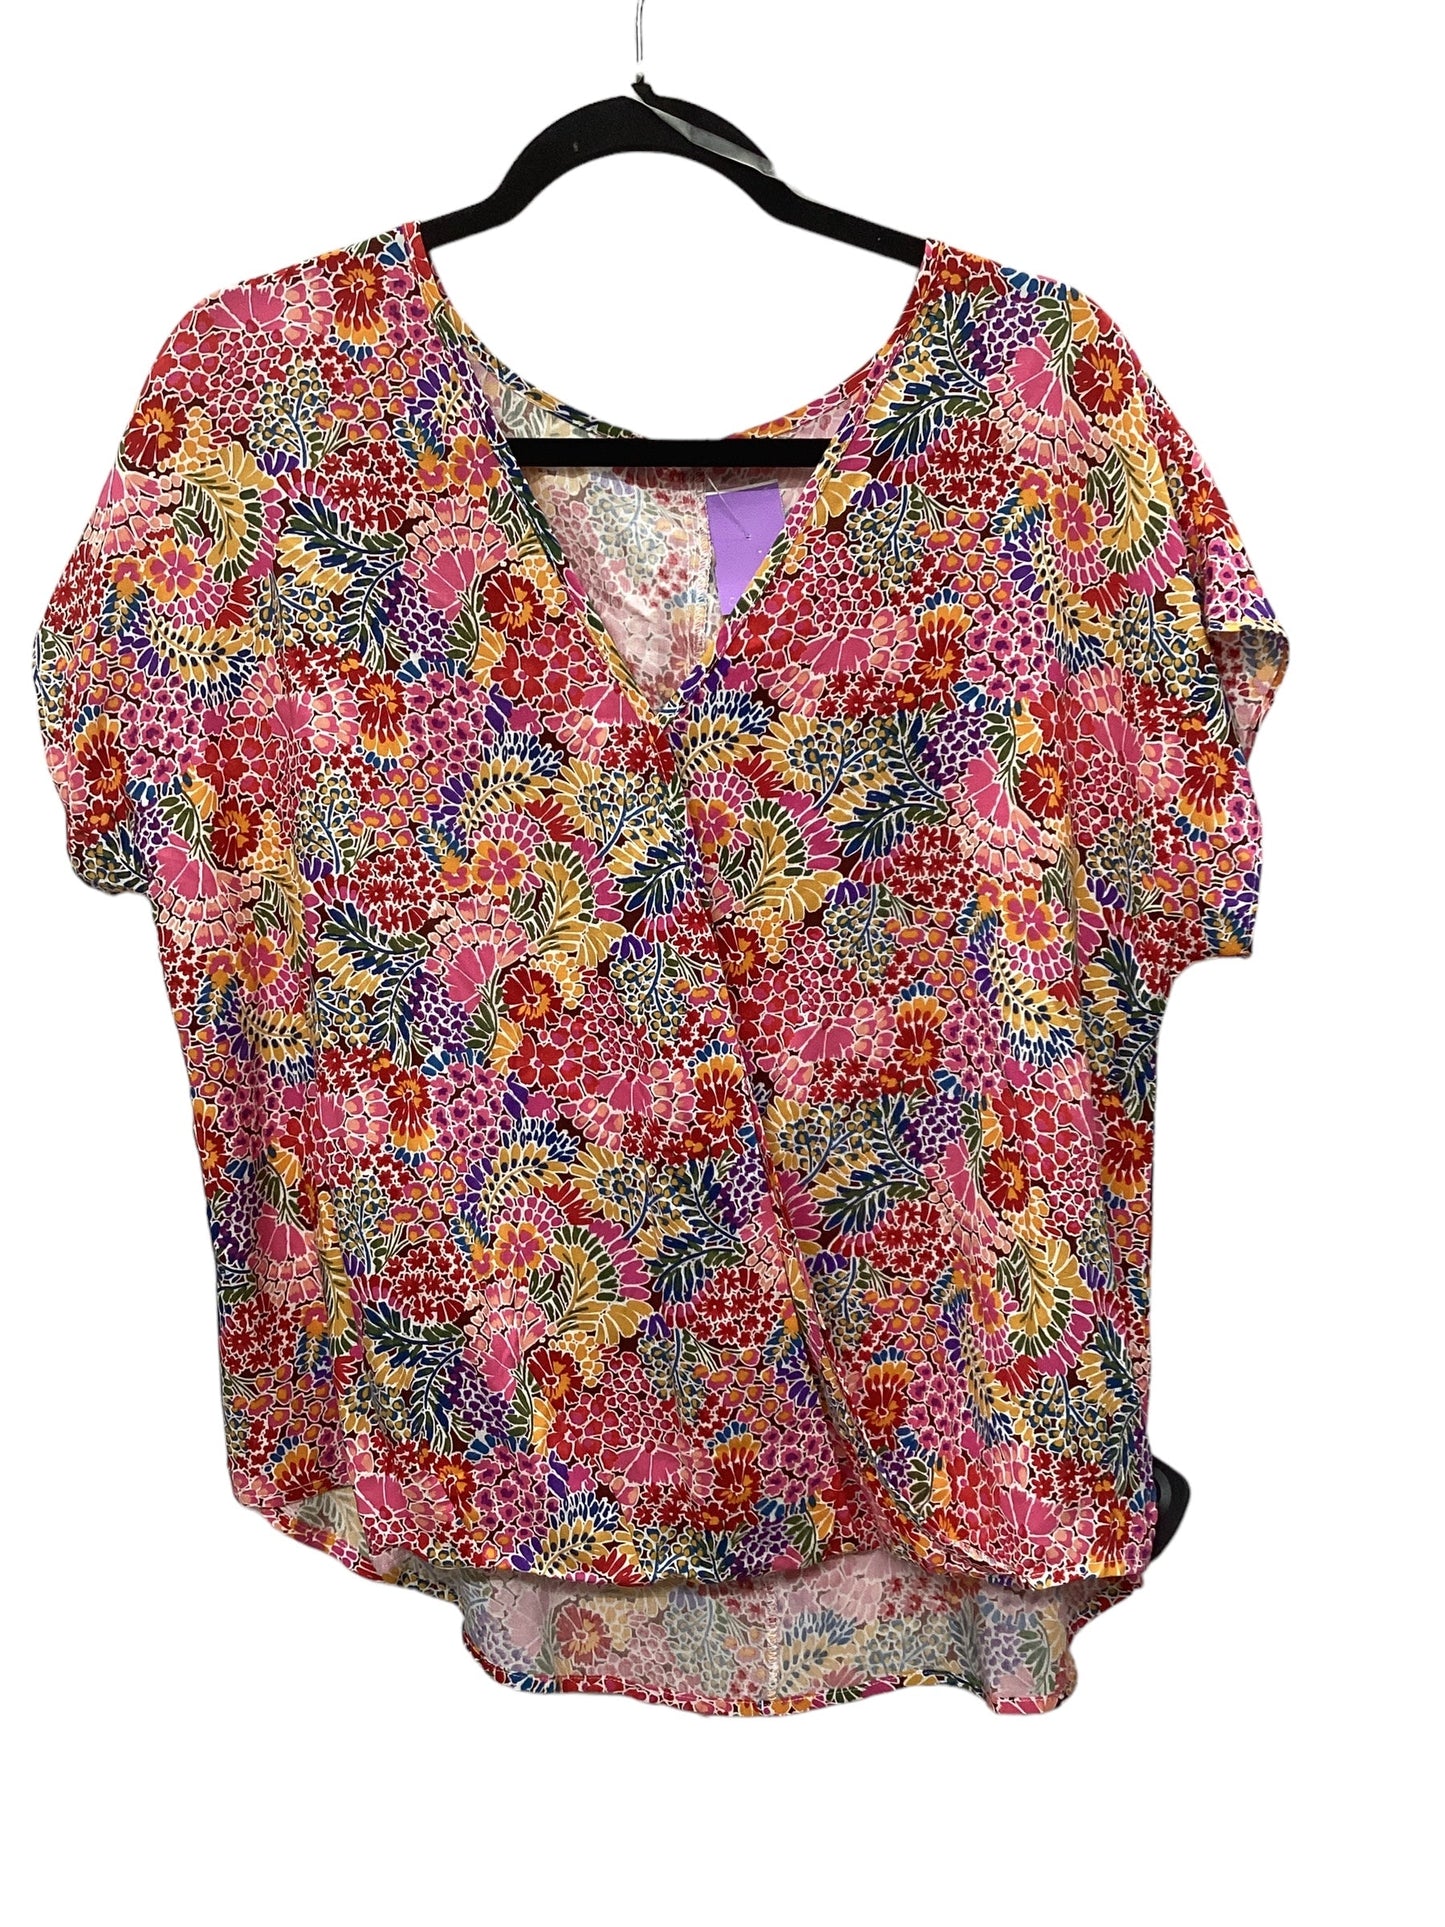 Multi-colored Top Short Sleeve Staccato, Size S